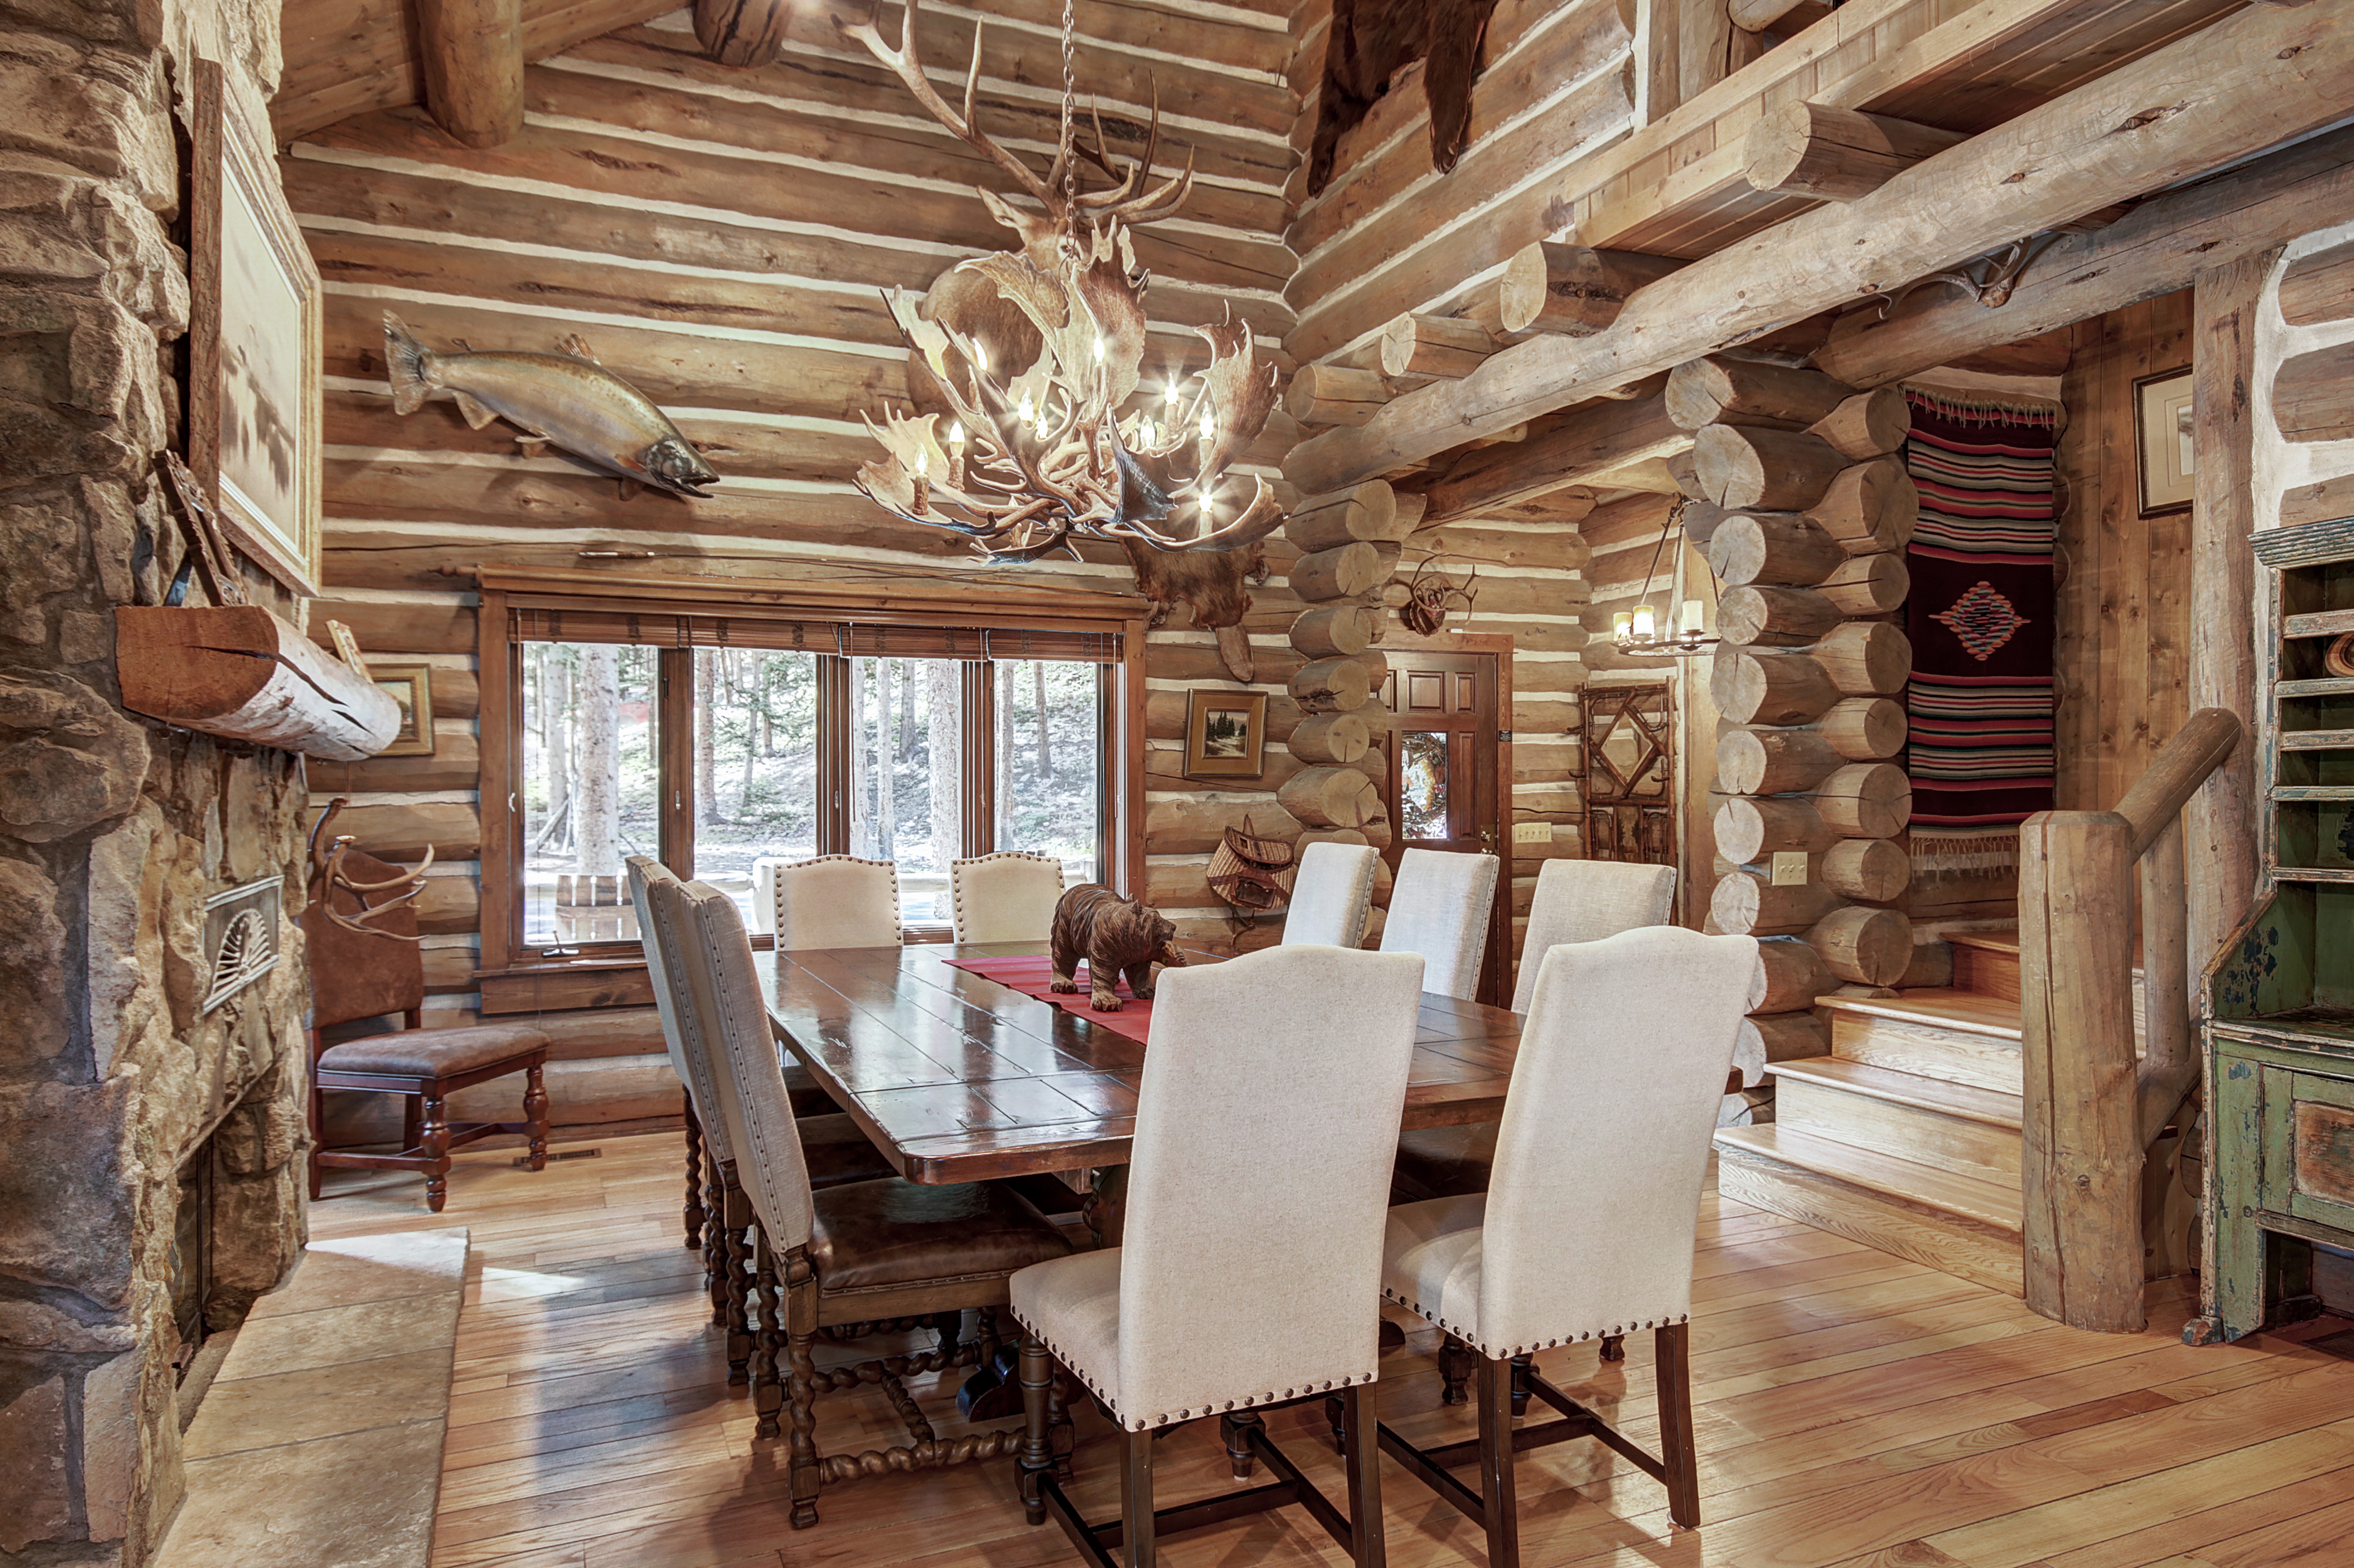 Additional dining area view - Bear Lodge Breckenridge Vacation Rental